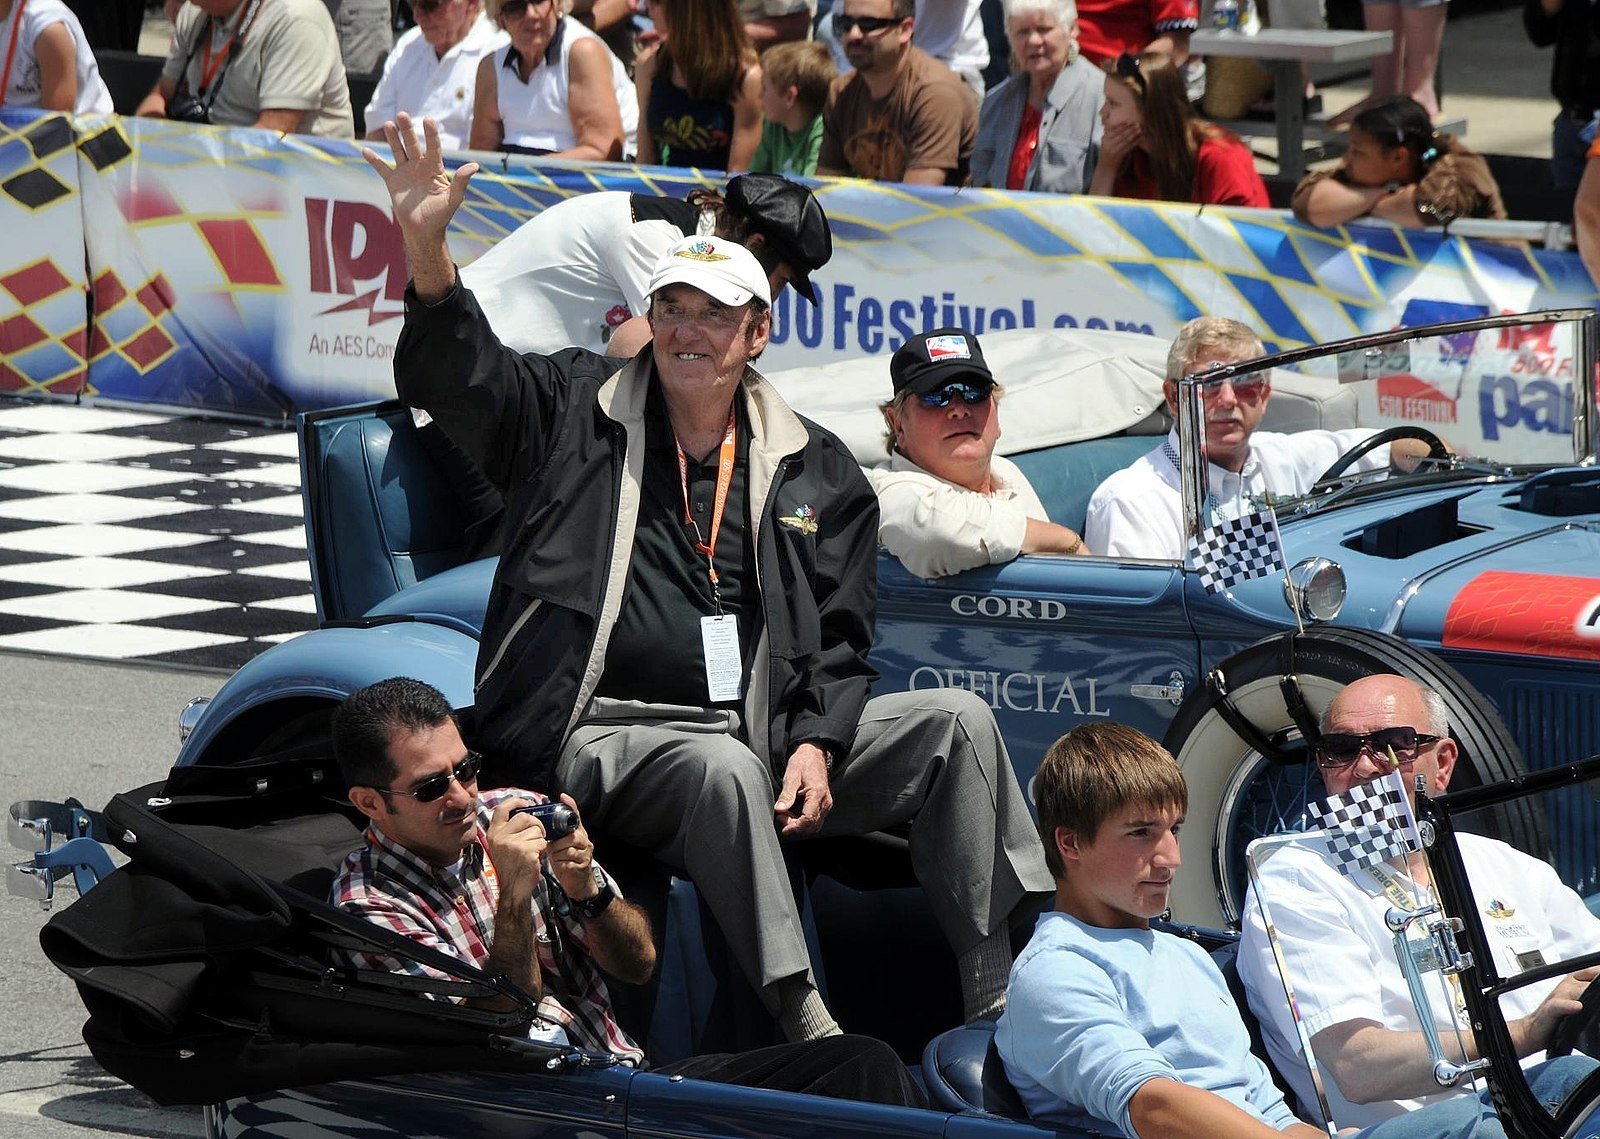 Jim Nabors at the opening of the Indianapolis 500 on May 24, 2008. | Photo: Wikimedia Commons, BSquared AKA Family Paparazzi, CC BY 2.0